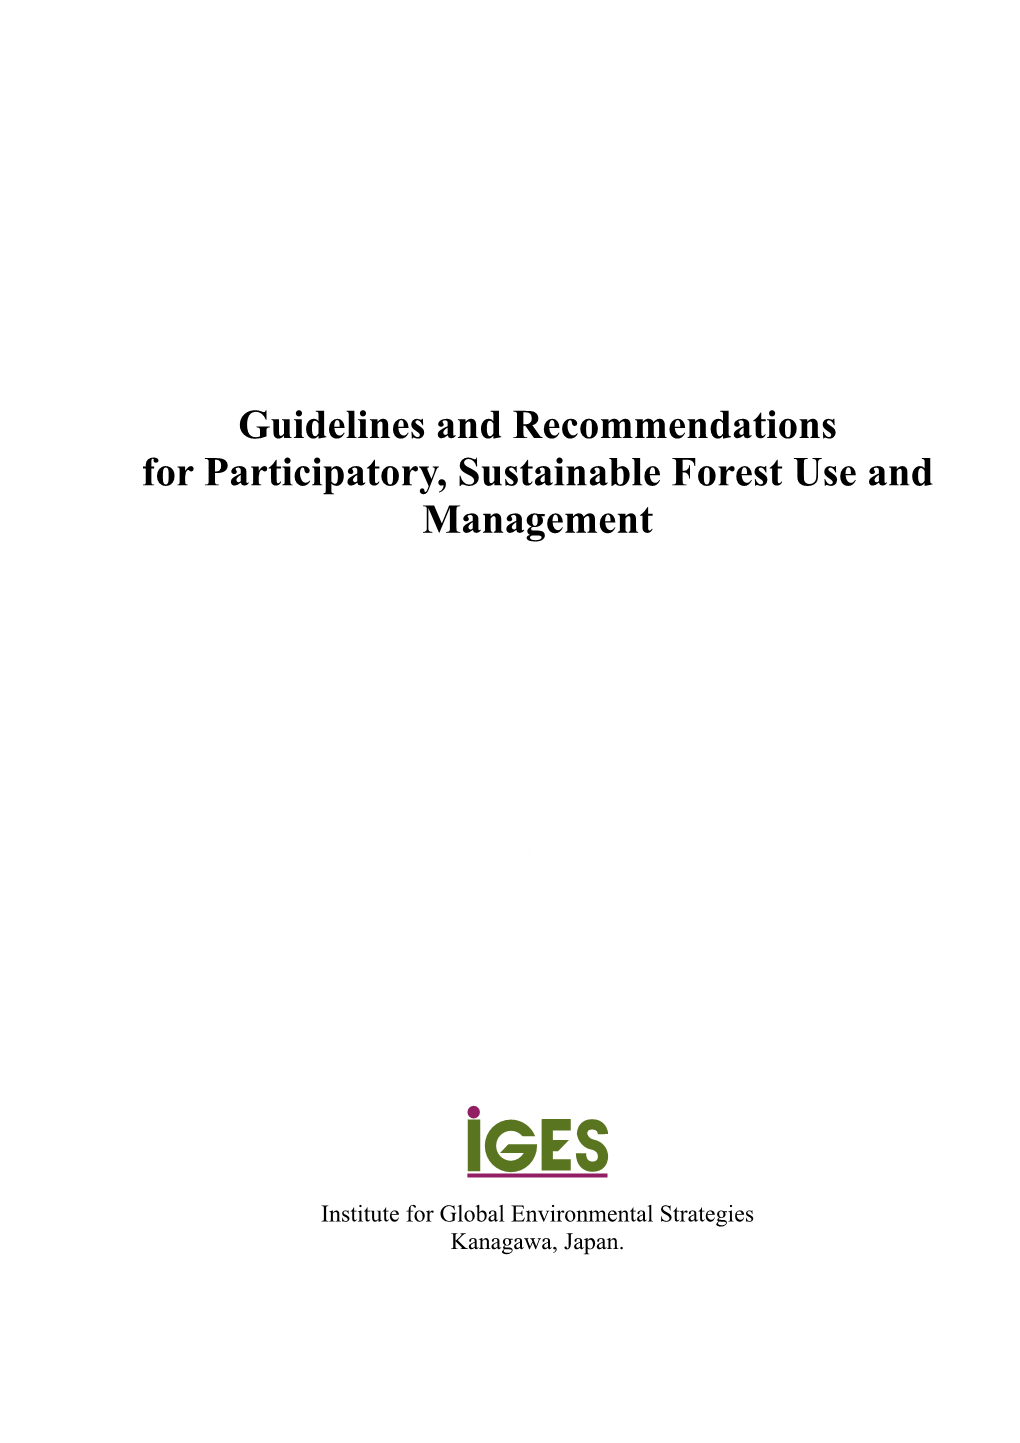 Guidelines and Recommendations for Participatory, Sustainable Forest Use and Management